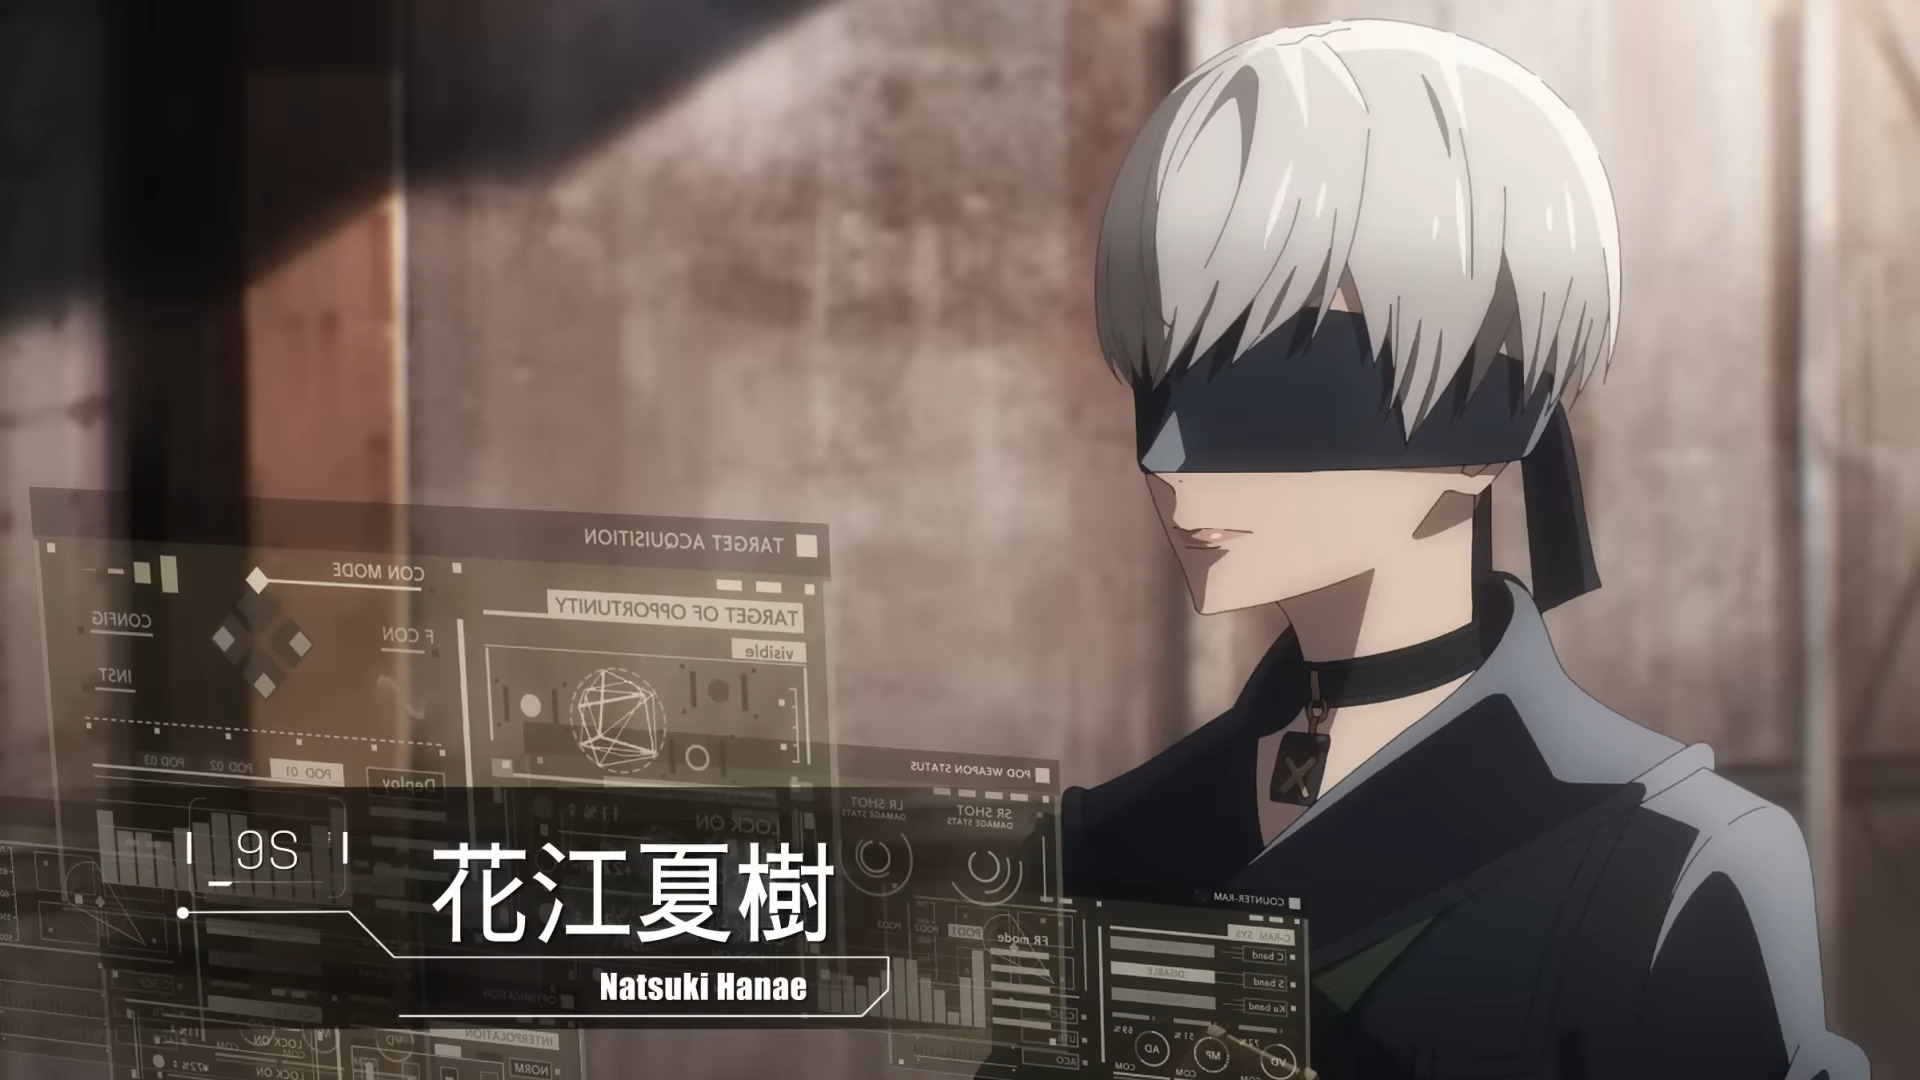 NieR:Automata anime trailer, release date, and primary cast revealed at  Aniplex Online Fest 2022